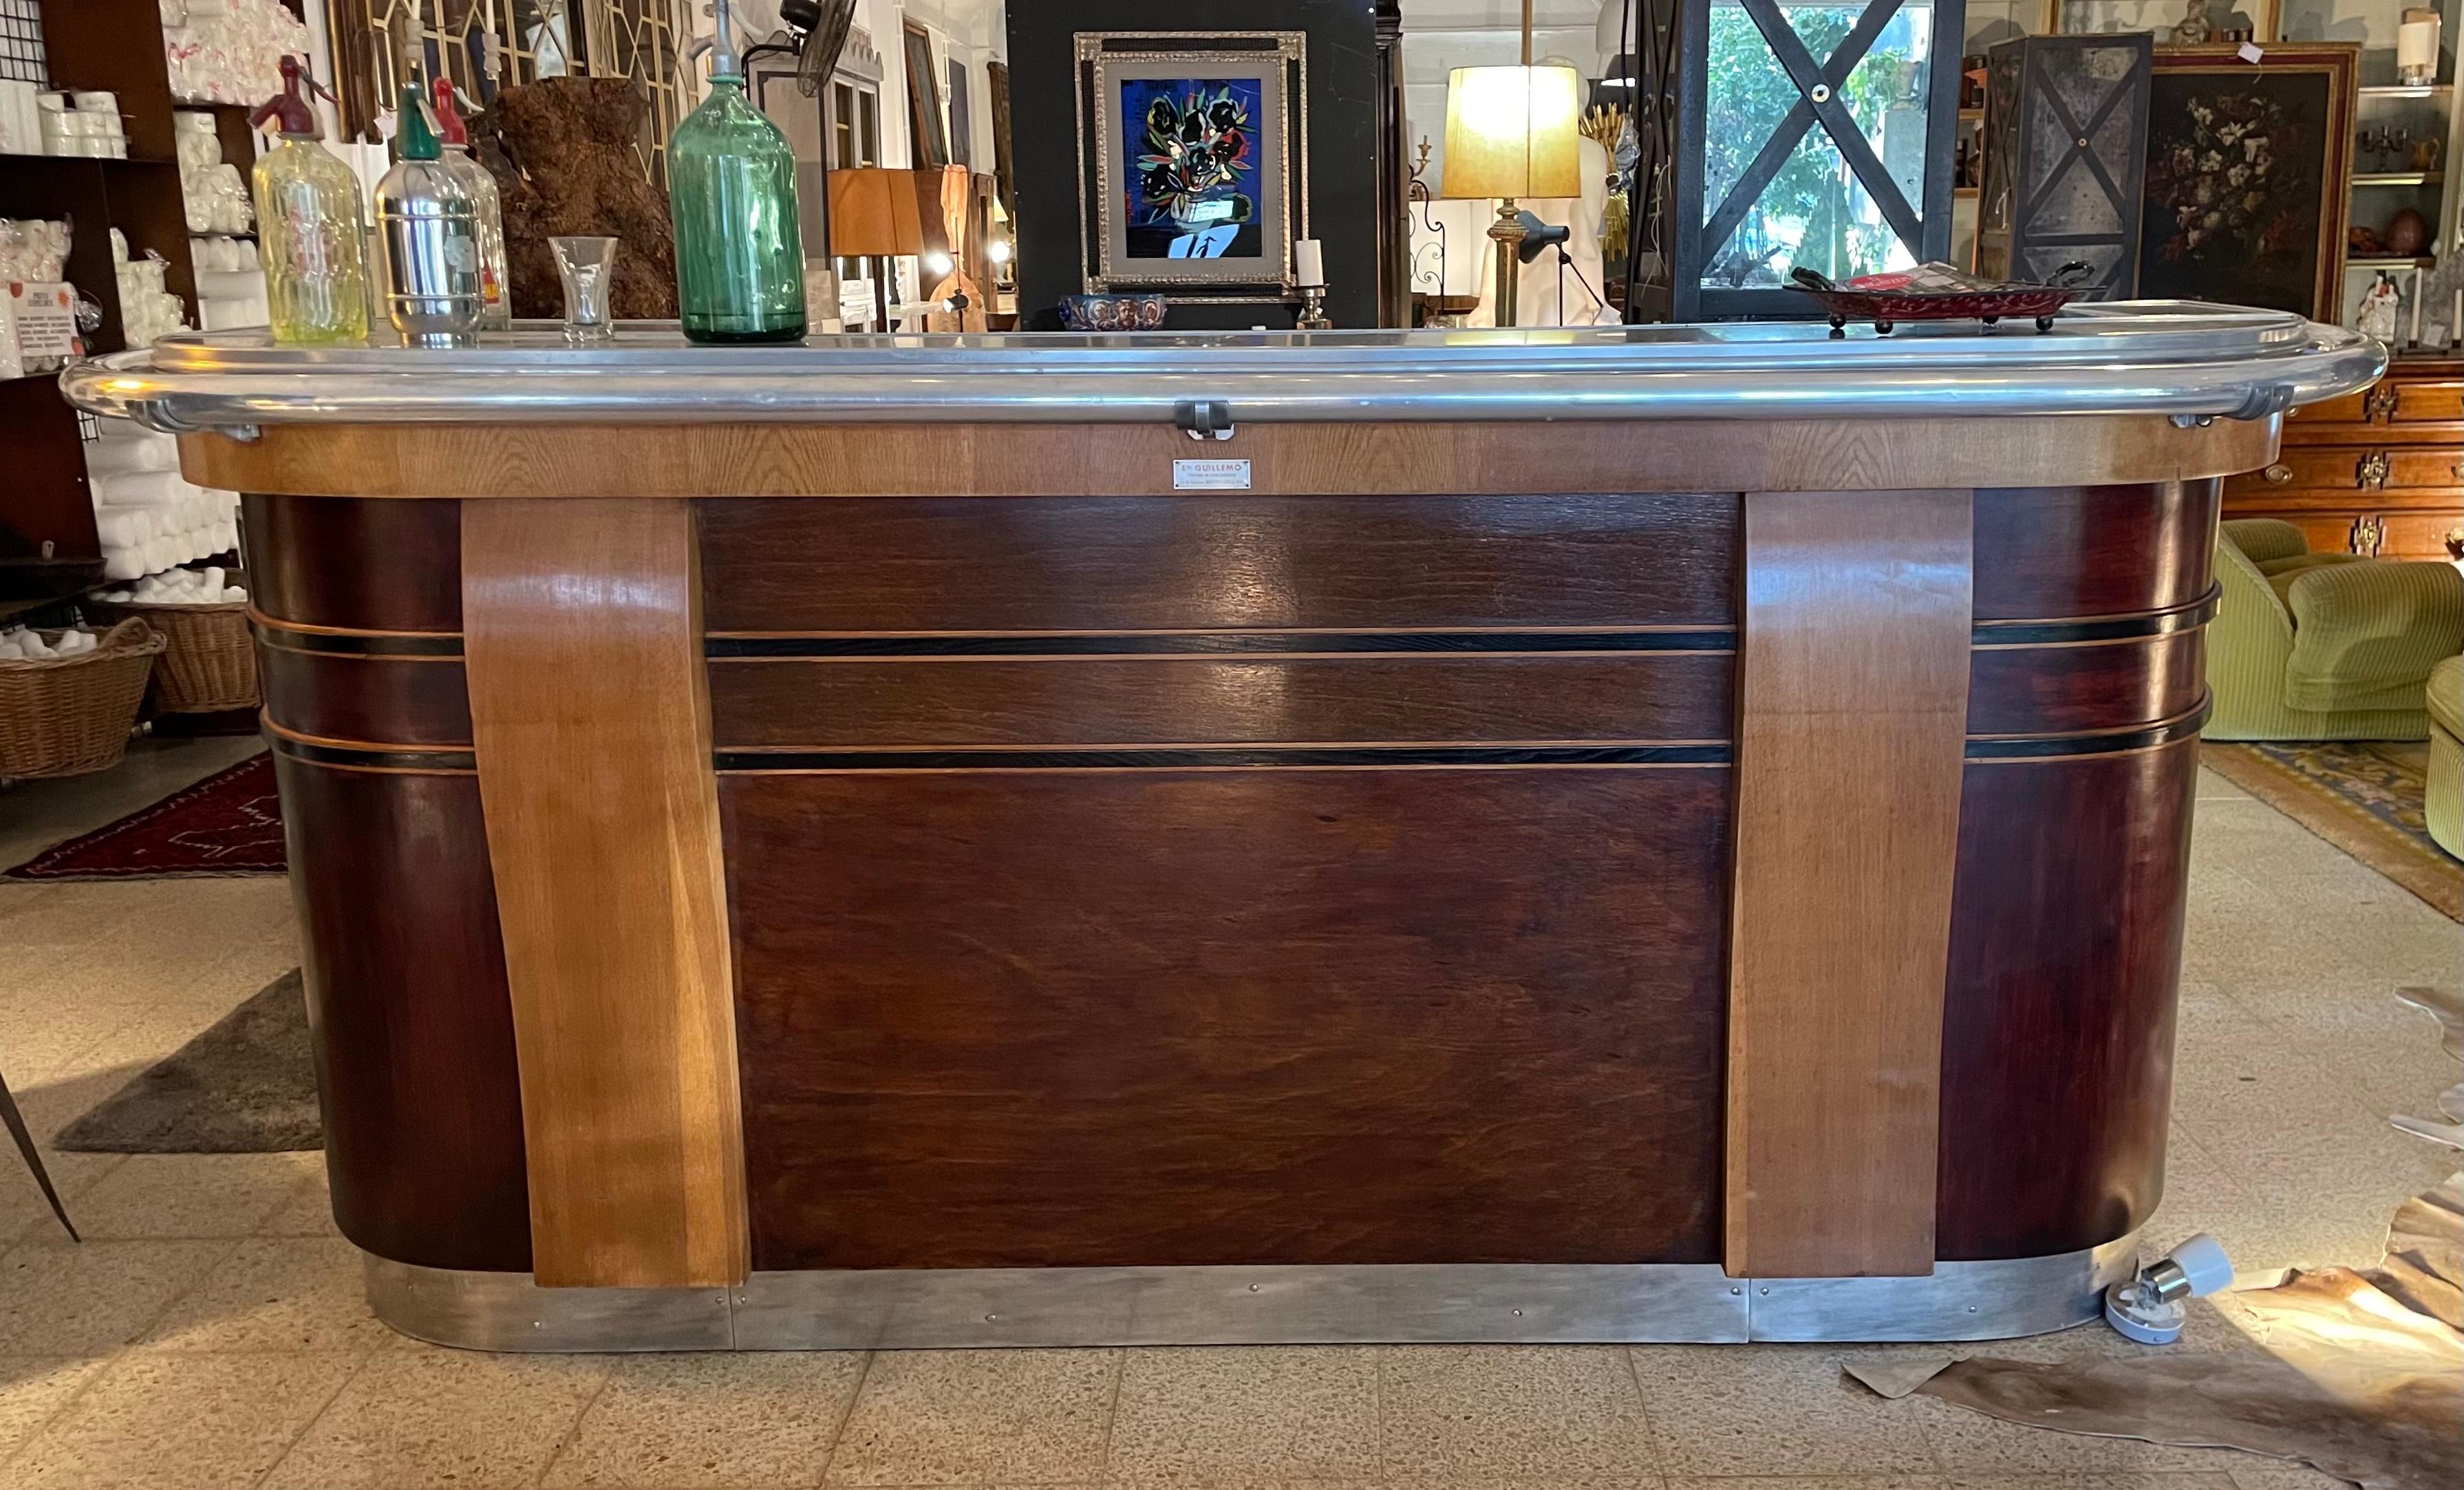 Bar counter from early 20th century. 
Rounded L-shaped, painted in dark brown but leaving its natural wood color in the two column-shaped reliefs, two marquetry inlays and under counter. 
Made of oak wood. The top surface, hand rail and baseboard